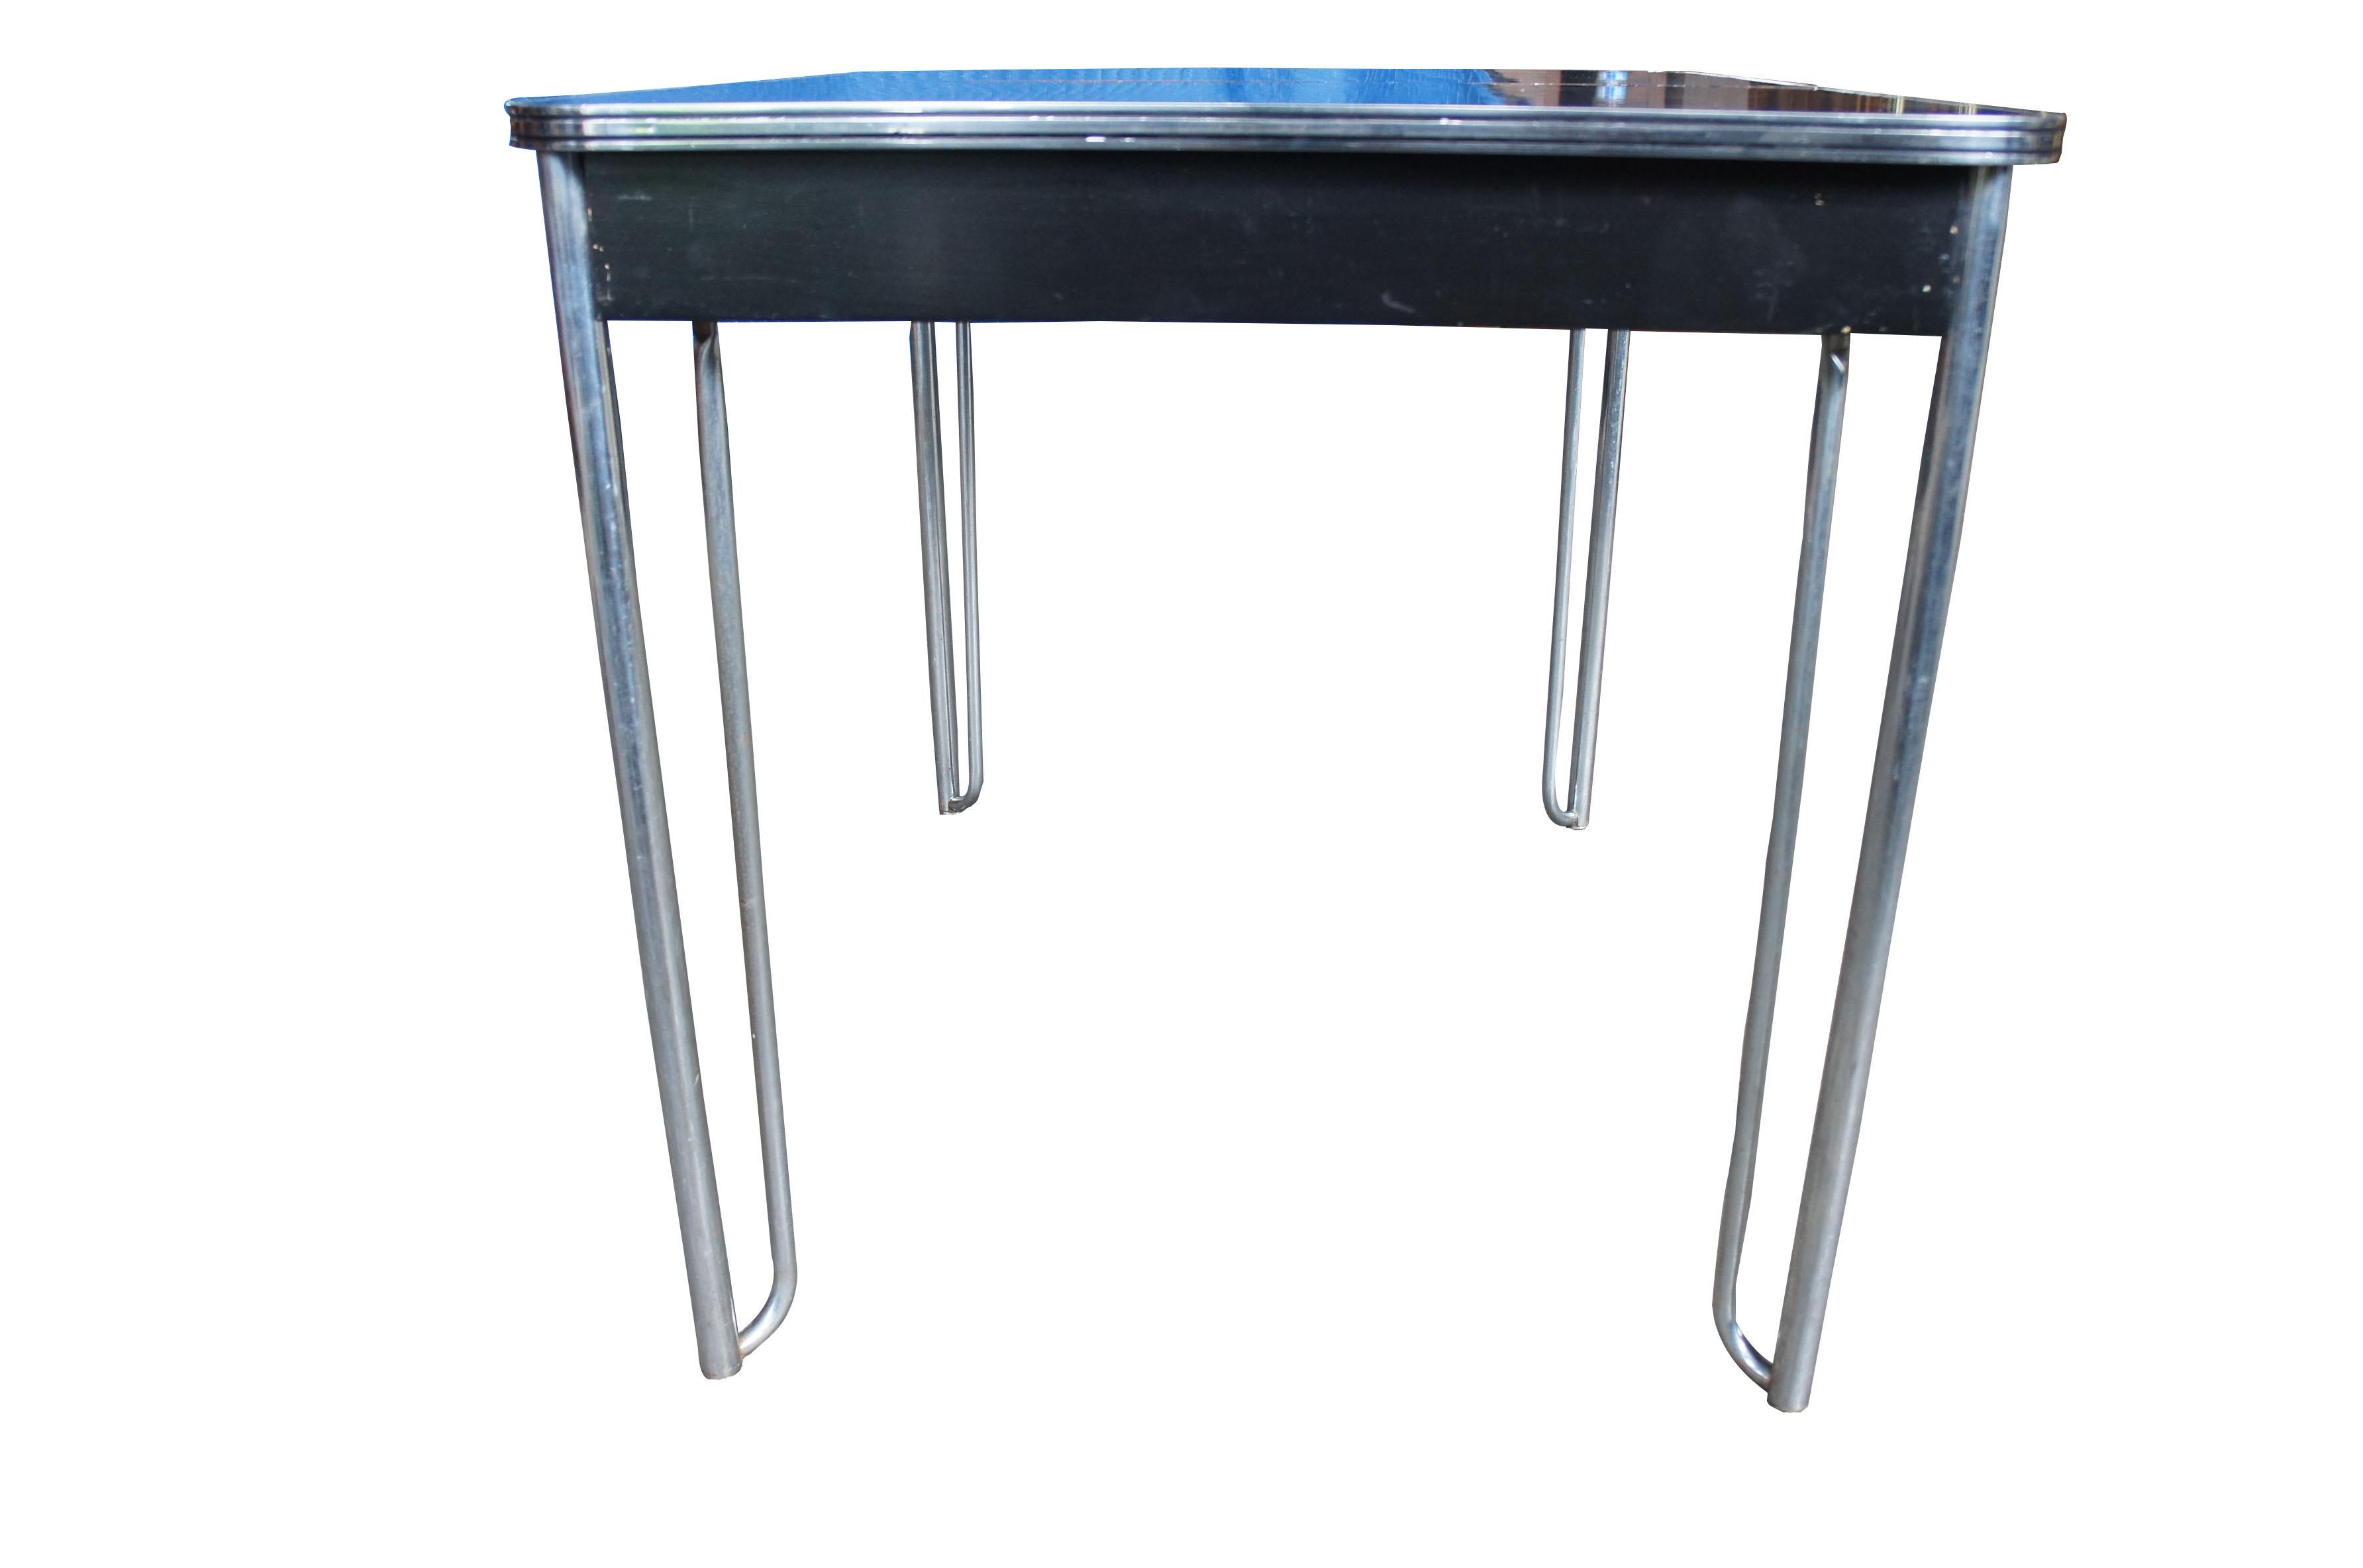 Art Deco breakfast table designed by Wolfgang Hoffmann for Howell Furniture. 
Features a tubular machine age design with black Micarta top.

Micarta tops came before formica, and was the original brand name created by George Westinghouse for